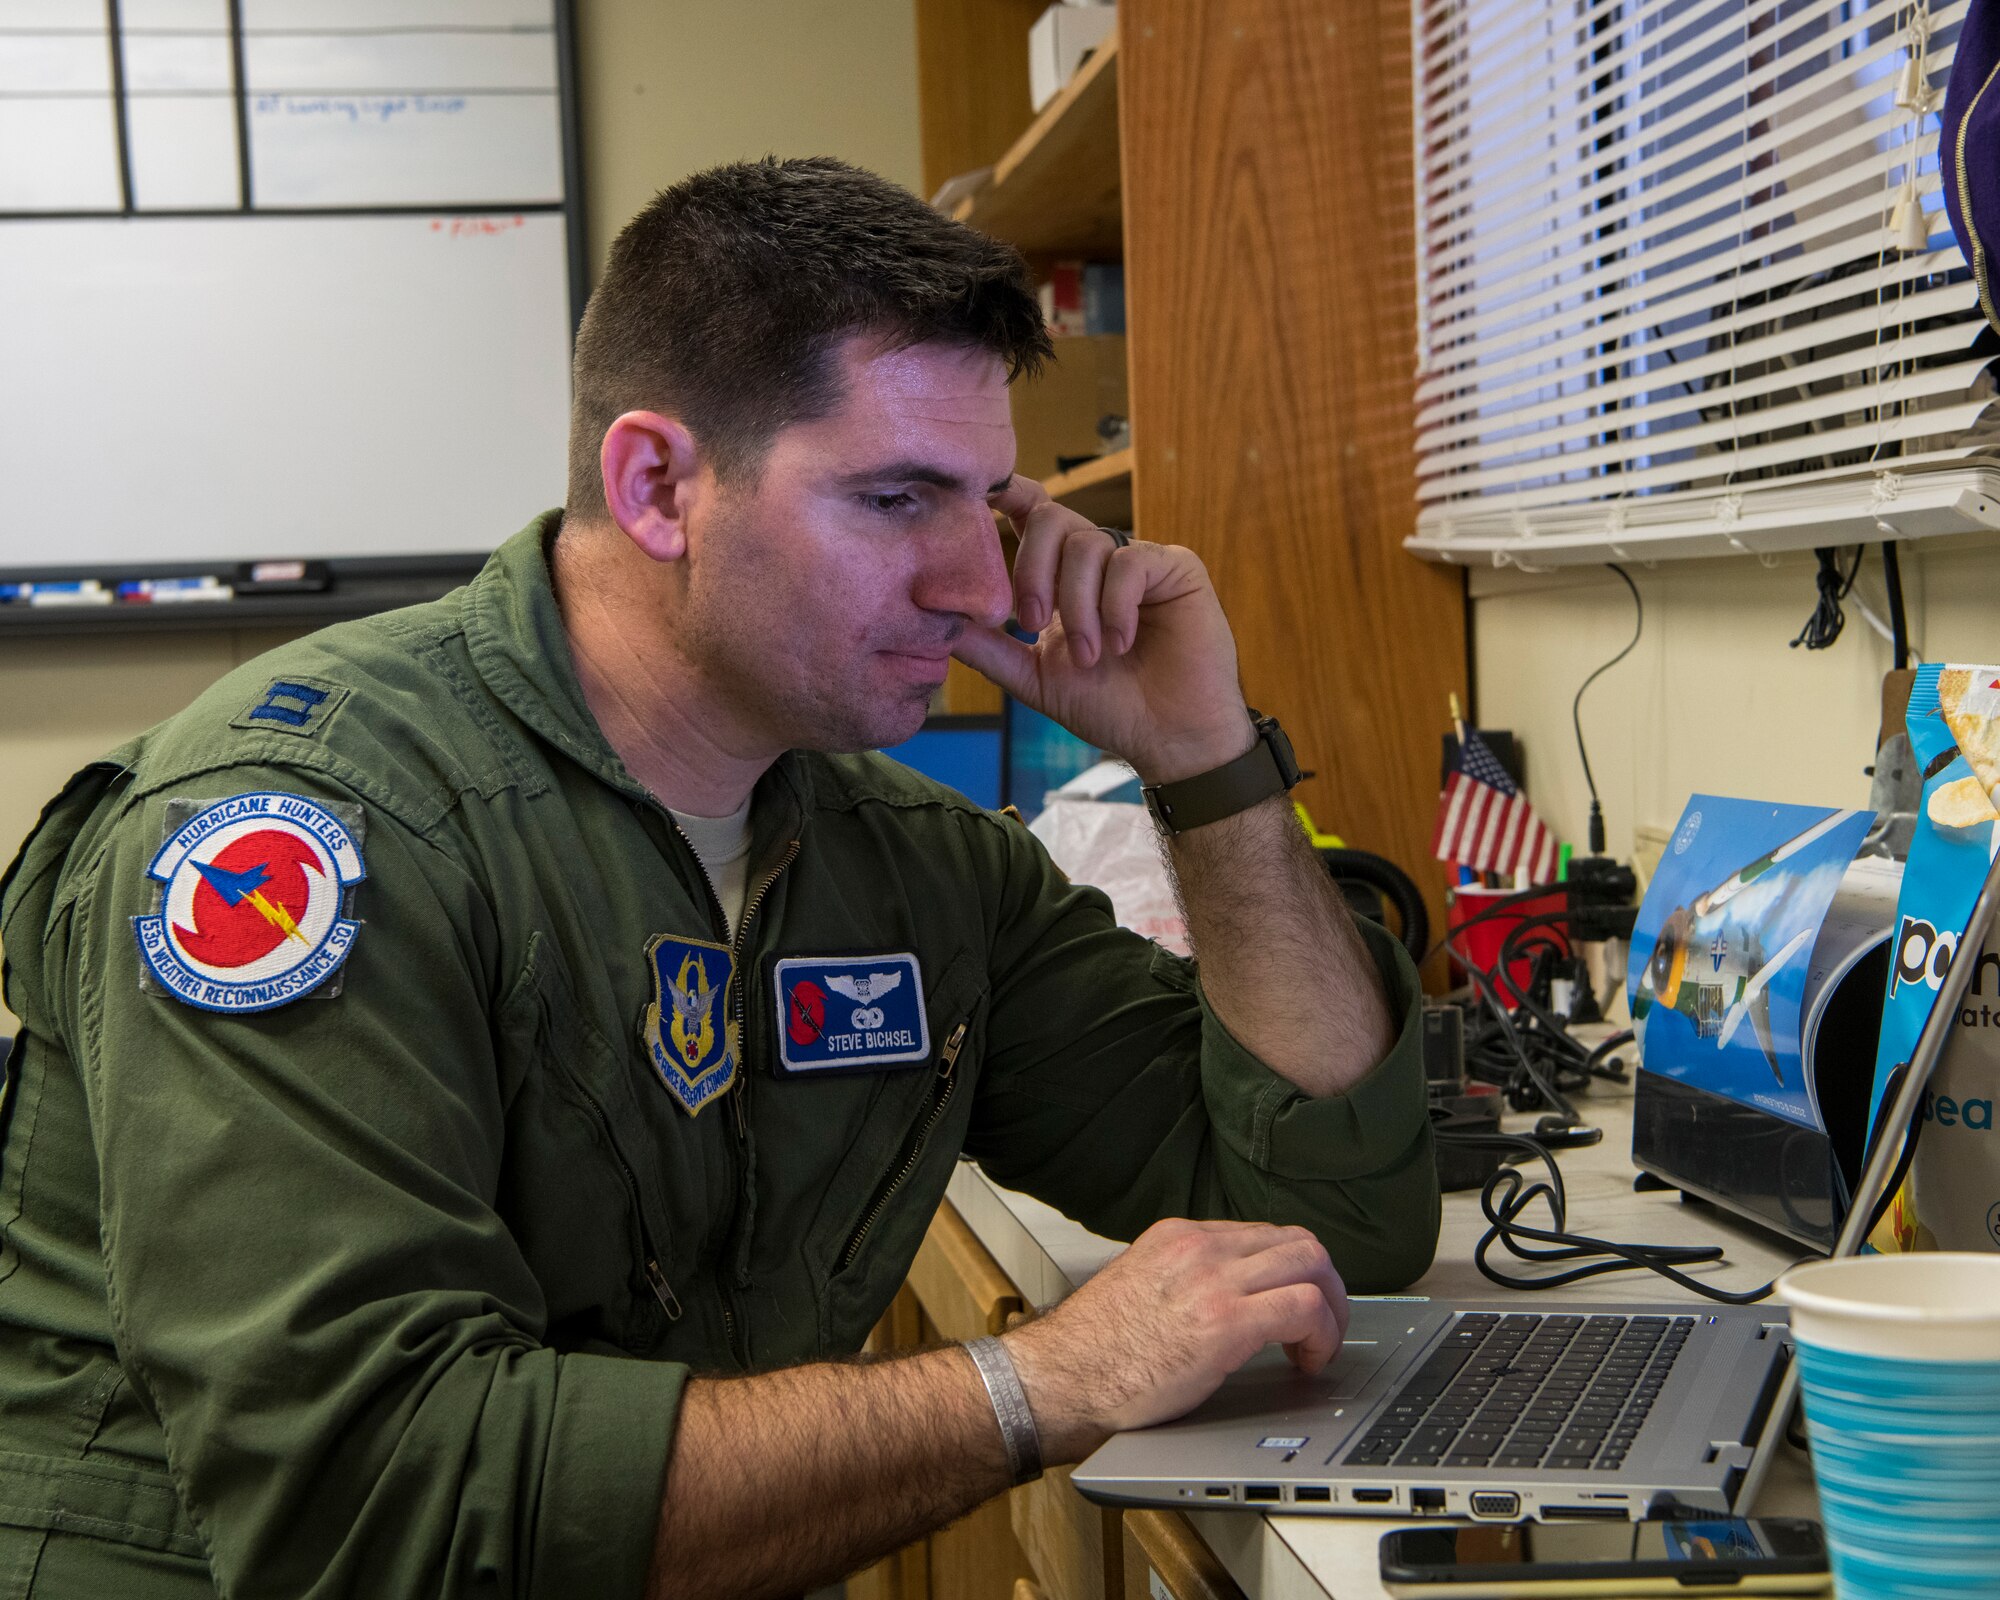 Capt. Steve Bichsel, 53rd Weather Reconnaissance Squadron navigator, types up a report, June 16, at St. Croix, U.S. Virgin Islands.  The Hurricane Hunters deployed to St. Croix to fly training missions over the Caribbean in preparation for the 2020 hurricane season. (U.S. Air Force photo by Tech. Sgt. Christopher Carranza)